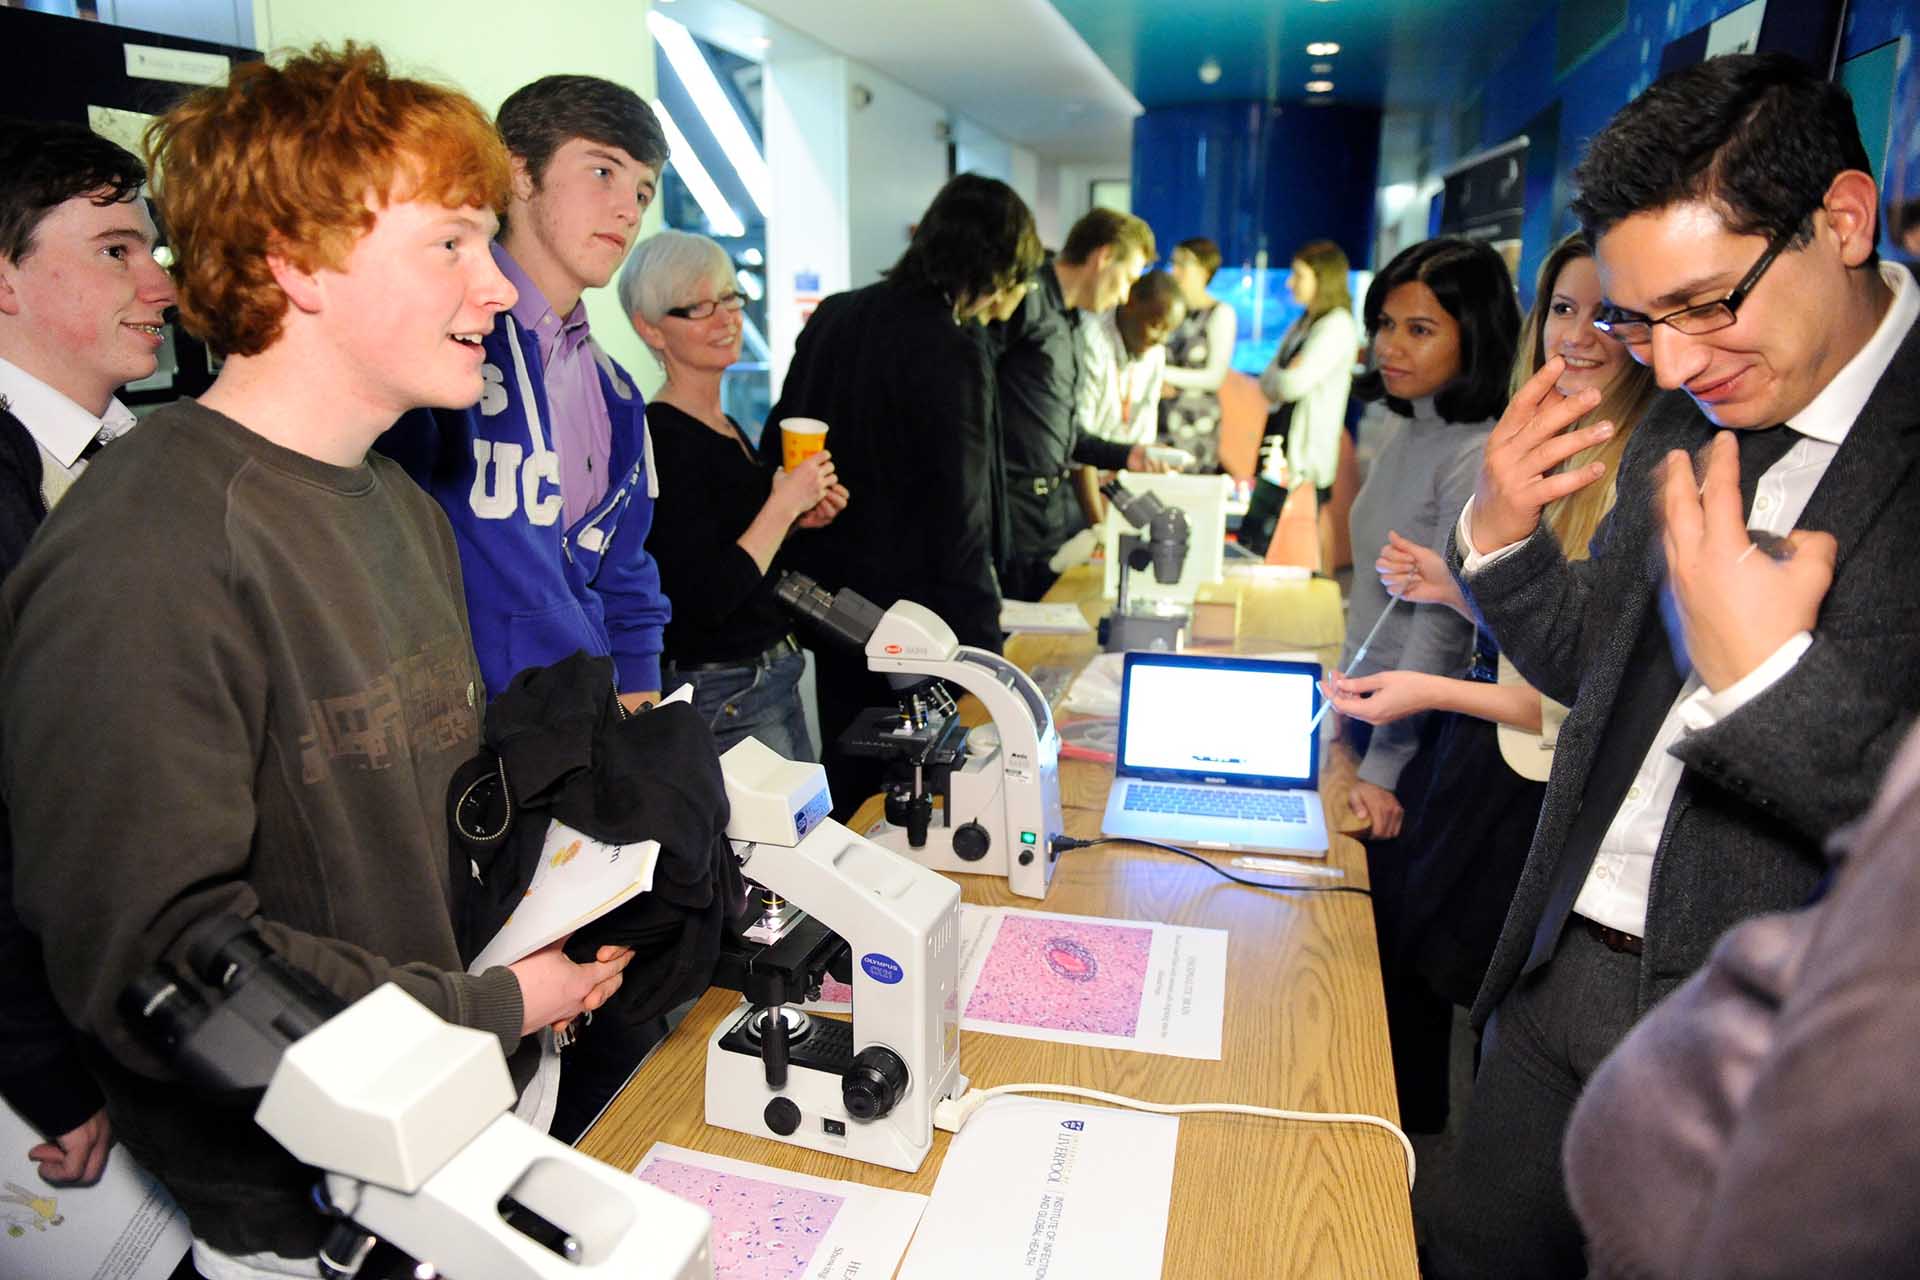 Microscope demonstration at open event